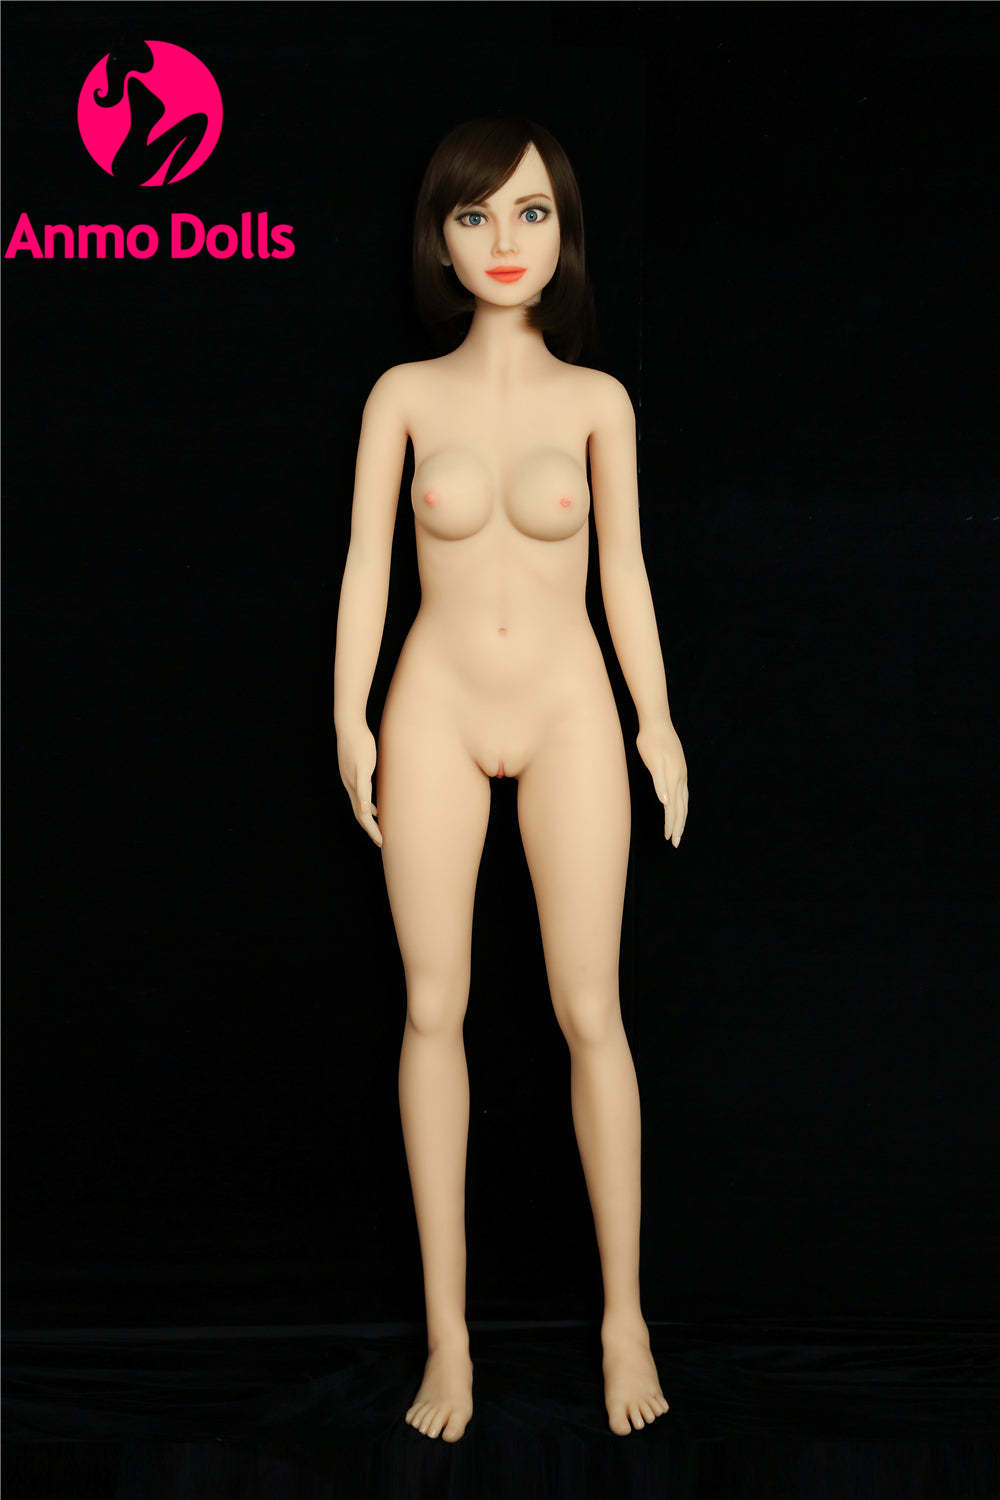 Halla - Beautiful White Sex doll with a angle face and blue eyes - TPE Sex doll by Anmodolls